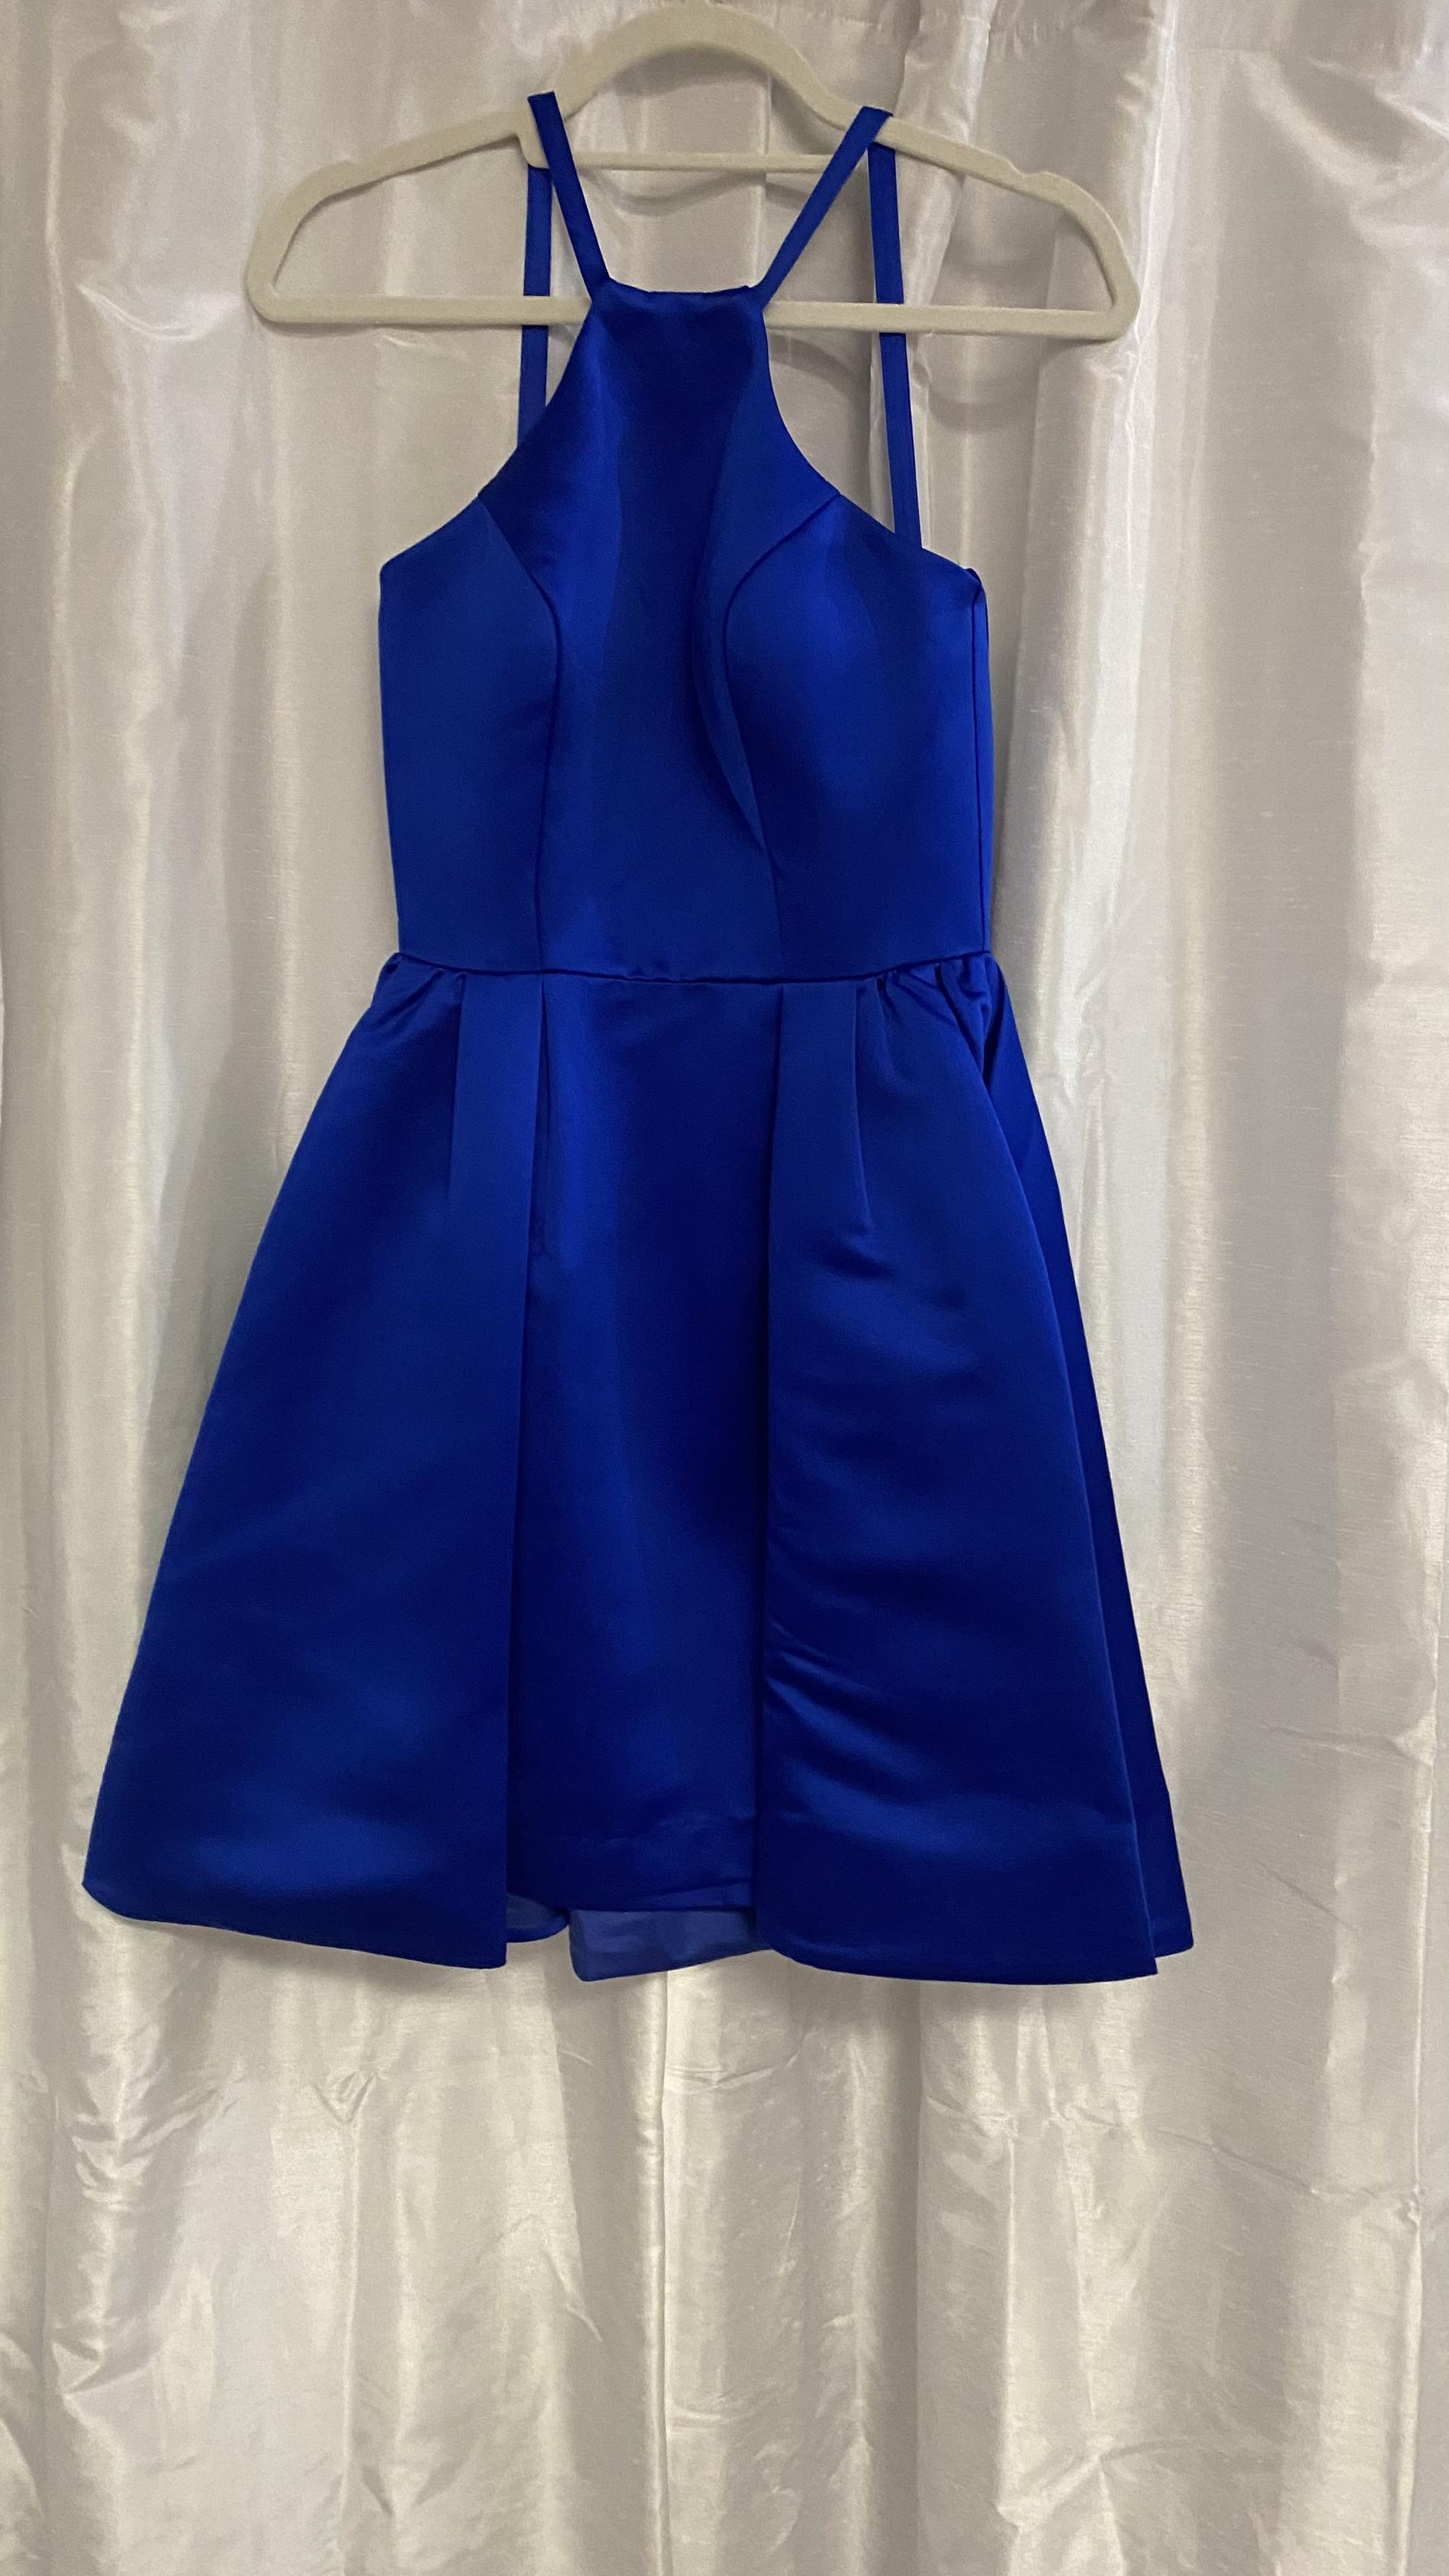 Ashley Lauren Size 4 Royal Blue Cocktail Dress on Queenly